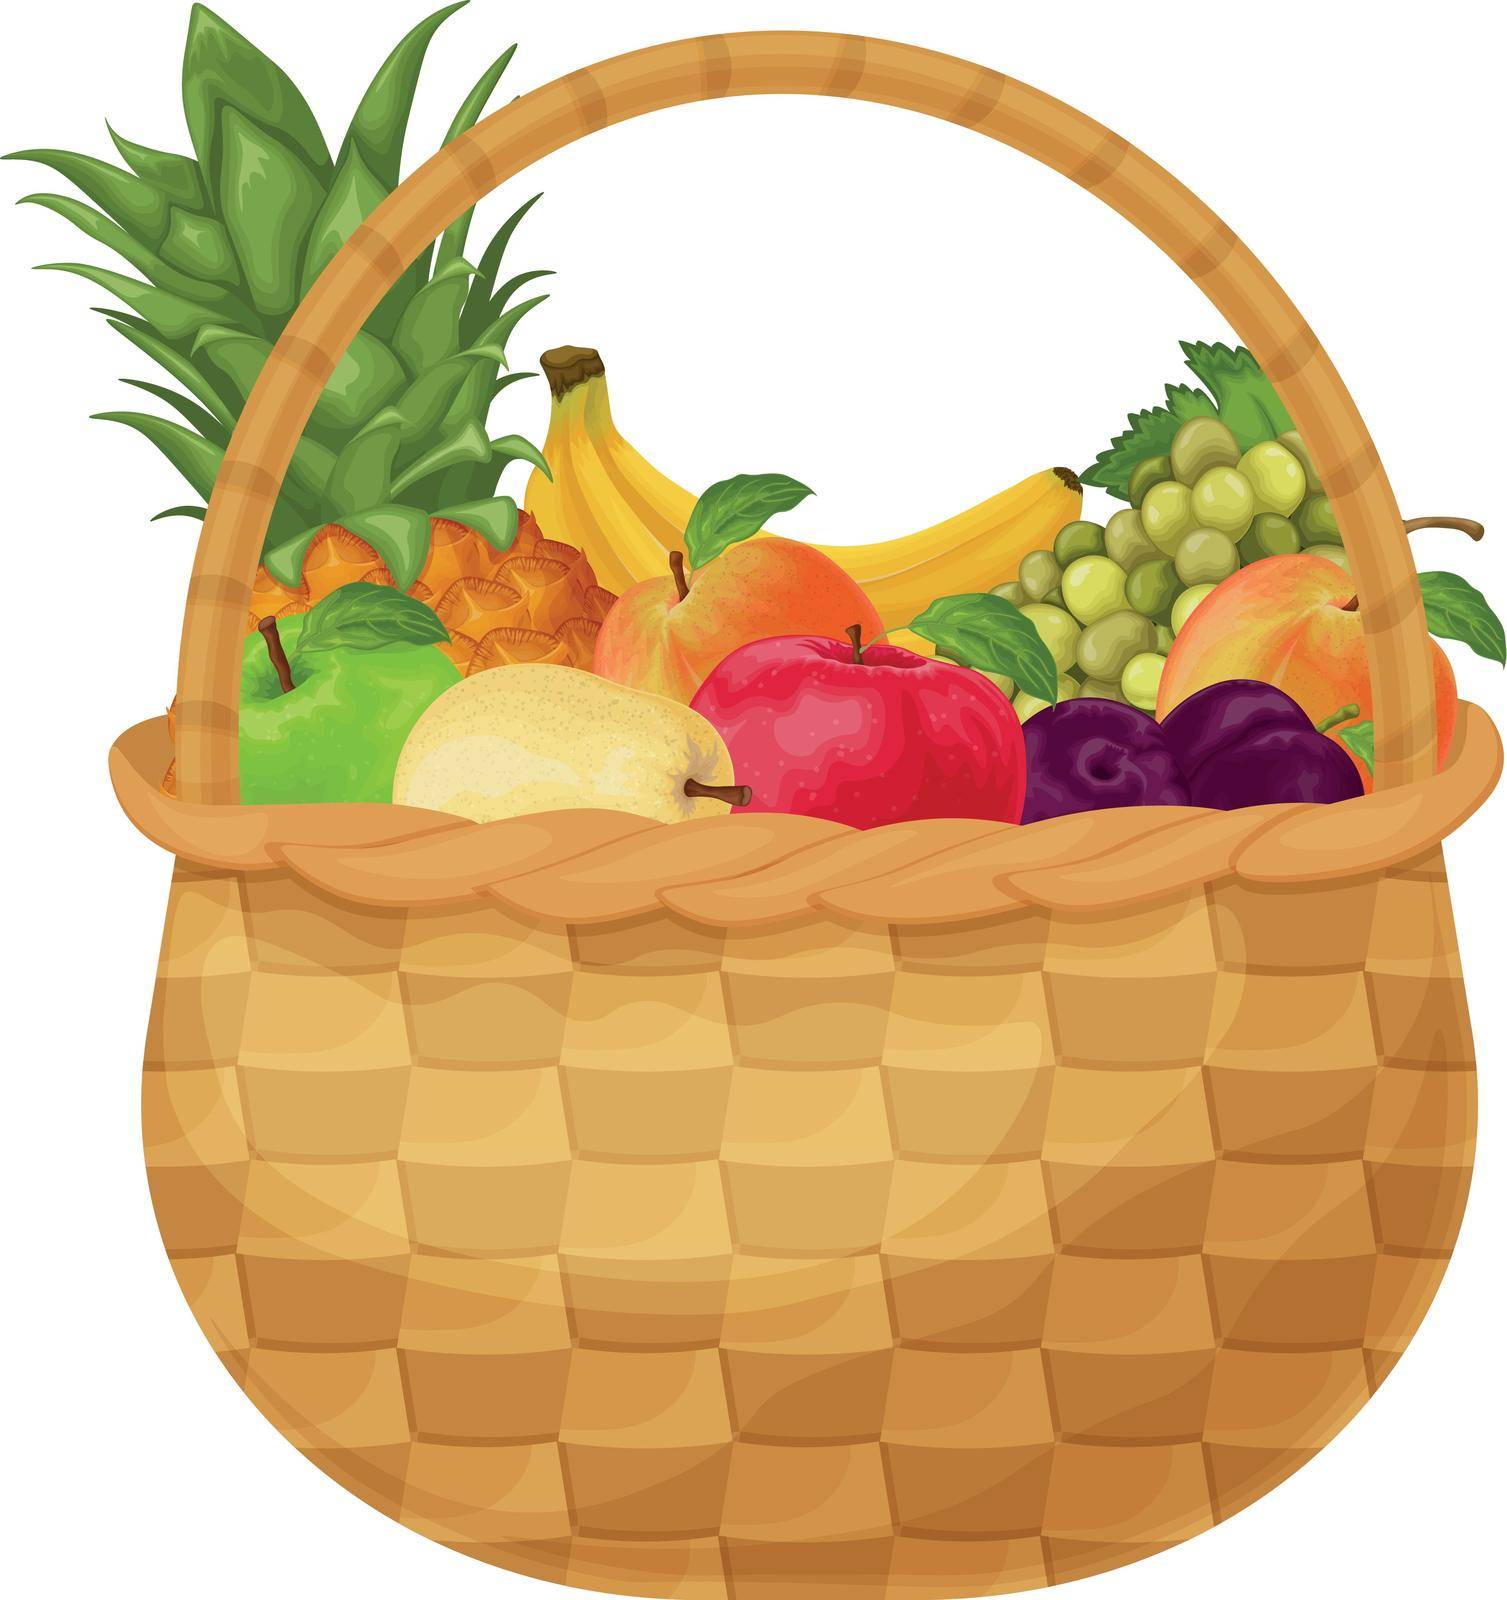 Basket with fruits such as banana, pineapple, grapes, peach and also apple, pear and plum. Fruit basket. Fruit in a wicker basket. Vector illustration isolated on a white background.